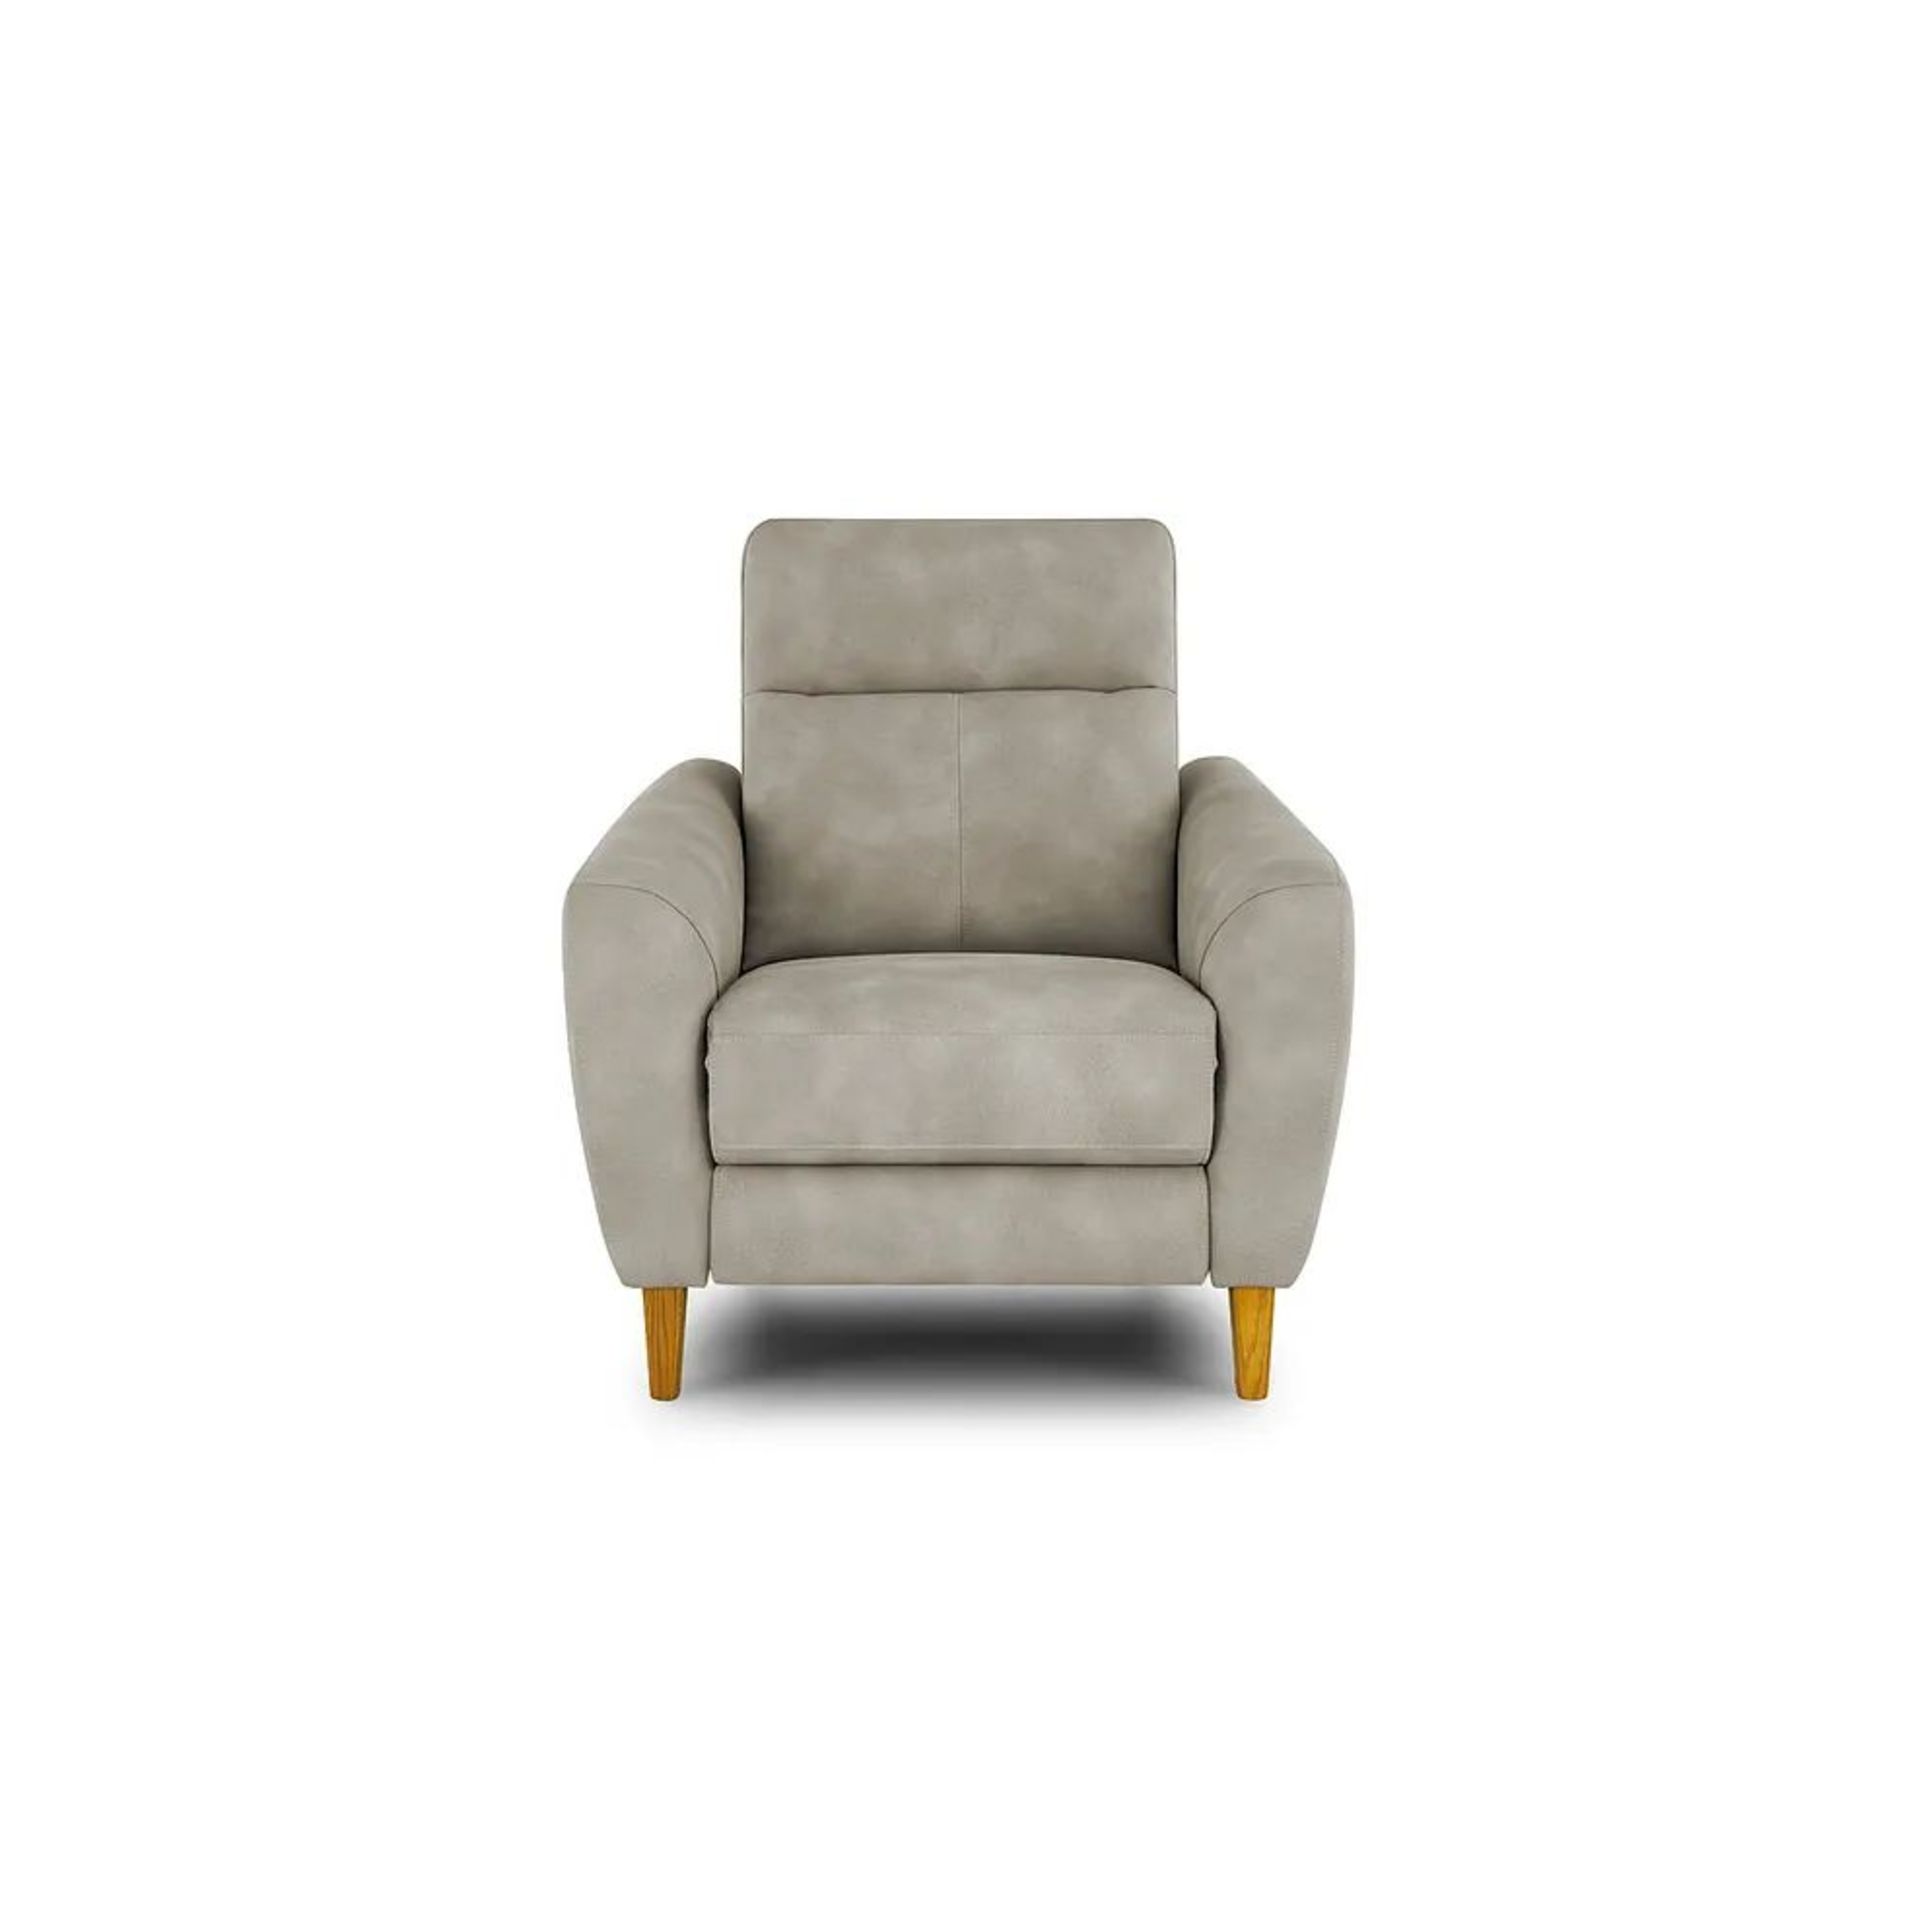 BRAND NEW DYLAN Static Armchair - OXFORD BEIGE FABRIC. RRP £749. Our Dylan armchair, shown here in - Bild 2 aus 8